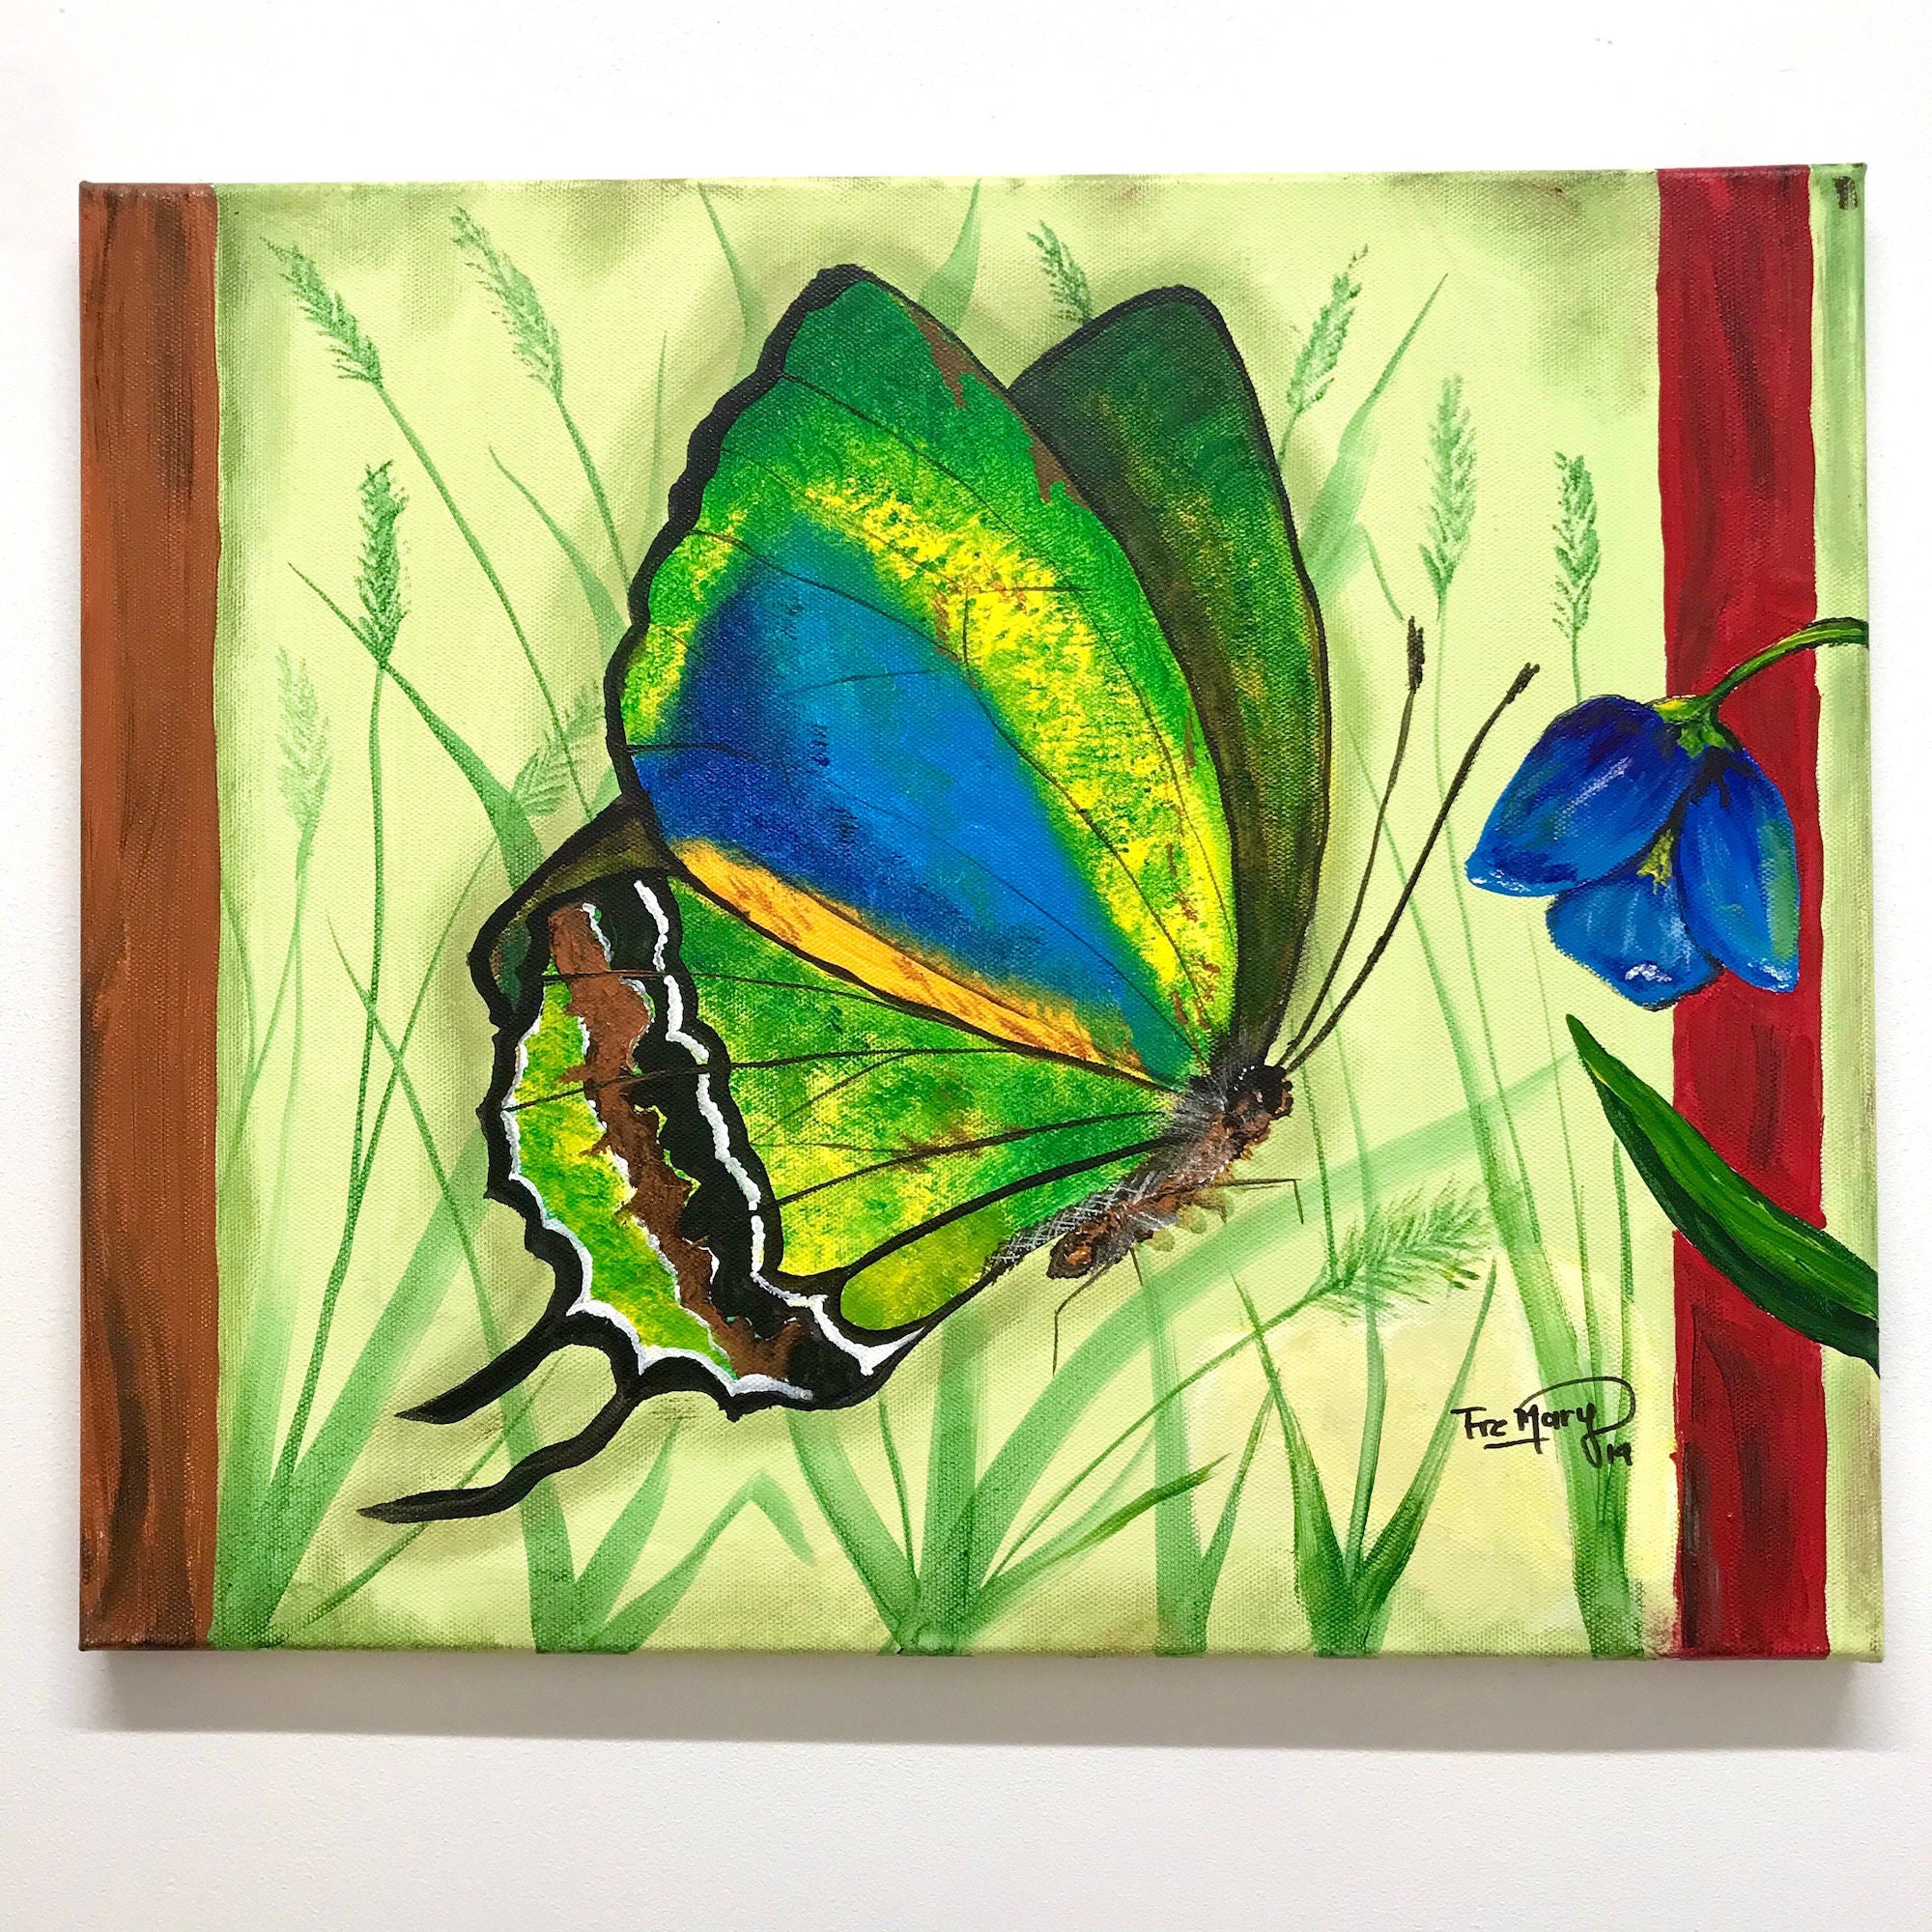 Butterfly Acrylic Painting On Canvas 46x38cm Size/Nature Lover Art Wall/Unique As Picture/Wildlife P